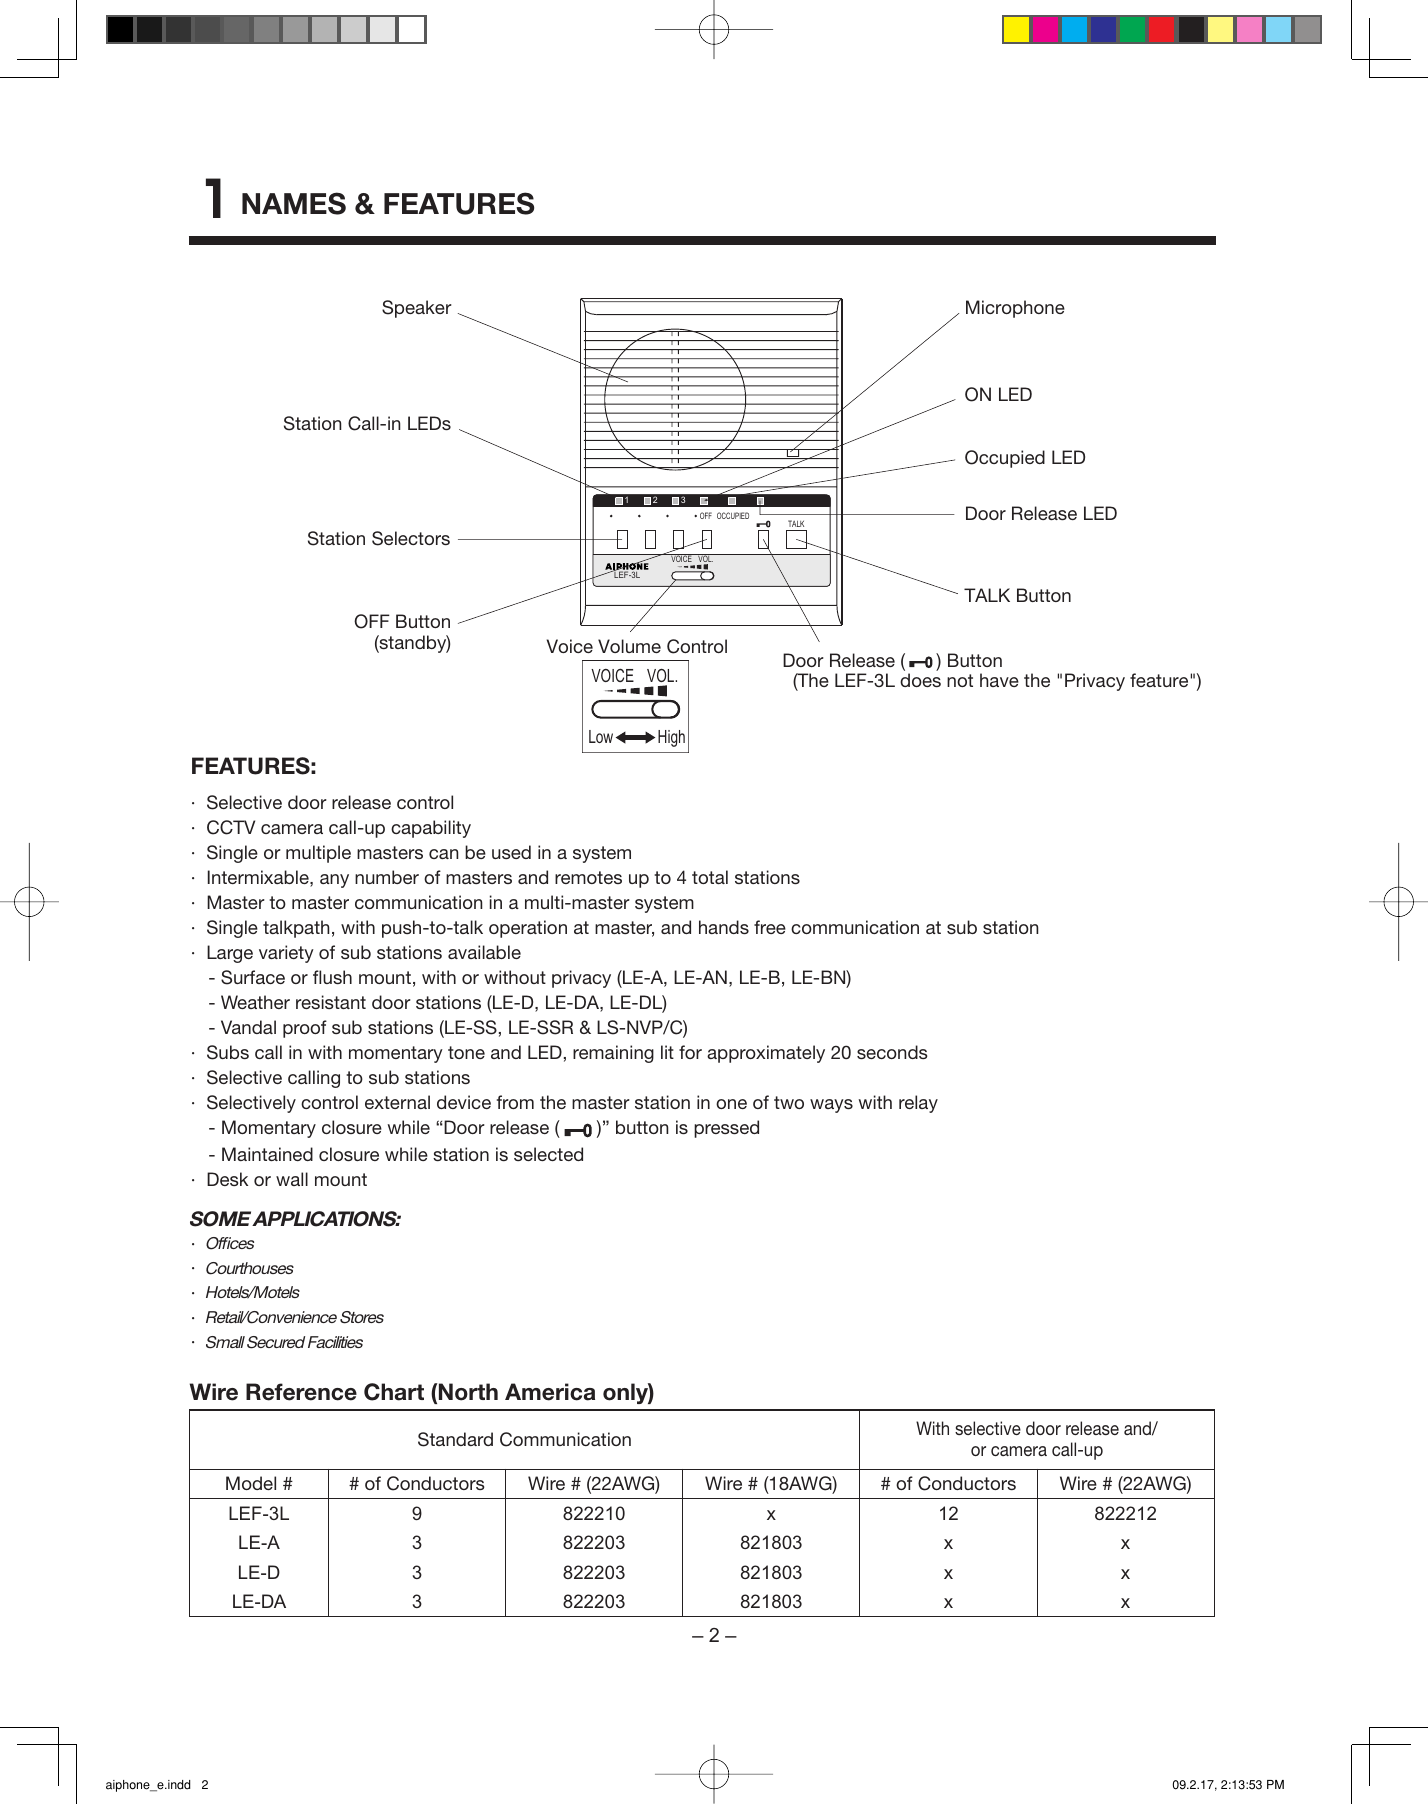 Page 2 of 12 - Aiphone Aiphone-Lef-3L-Users-Manual- Aiphone_e  Aiphone-lef-3l-users-manual